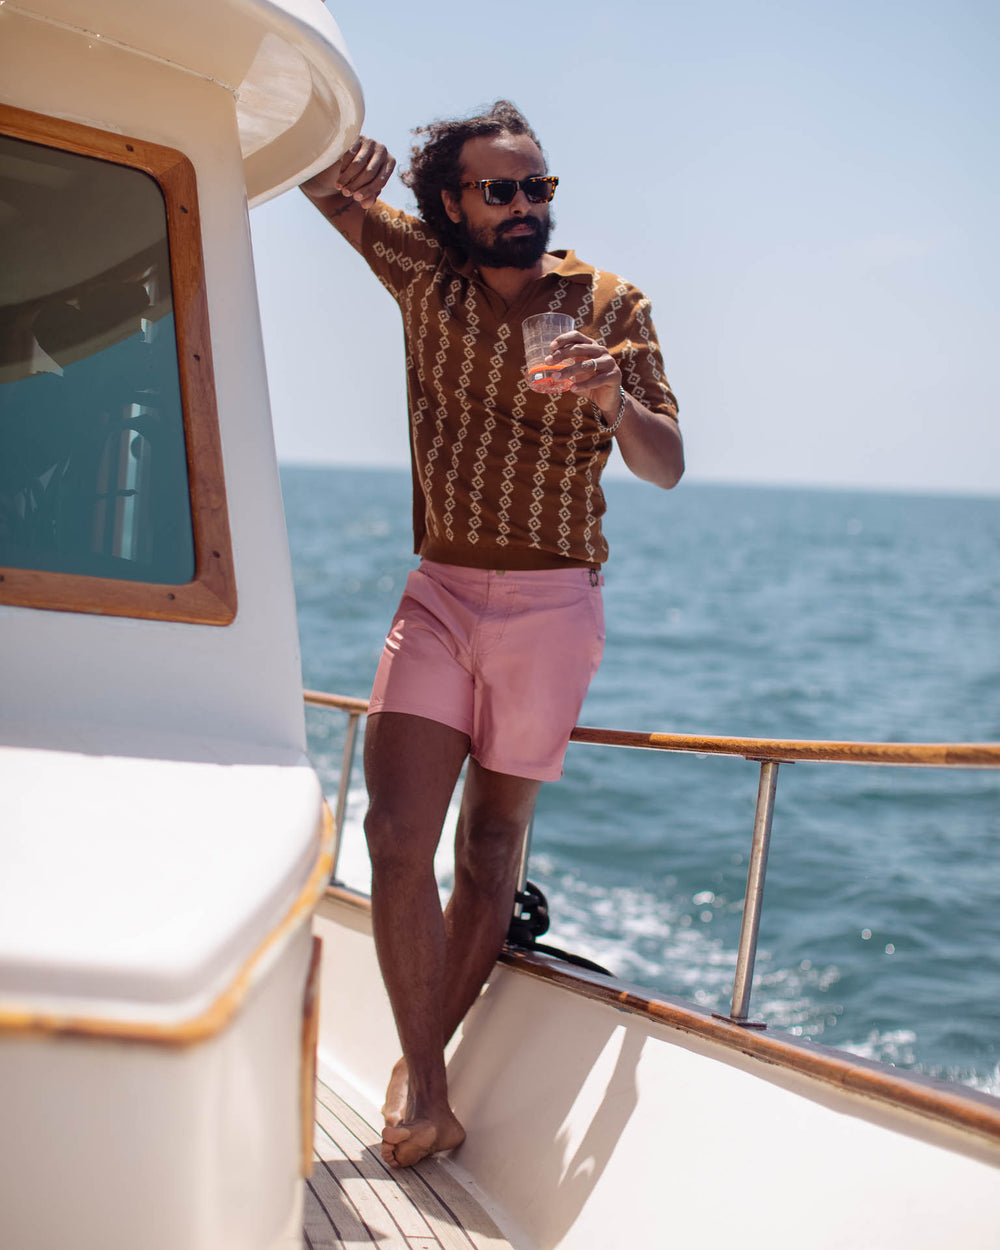 man standing on the boat has wearing dandy del clothes